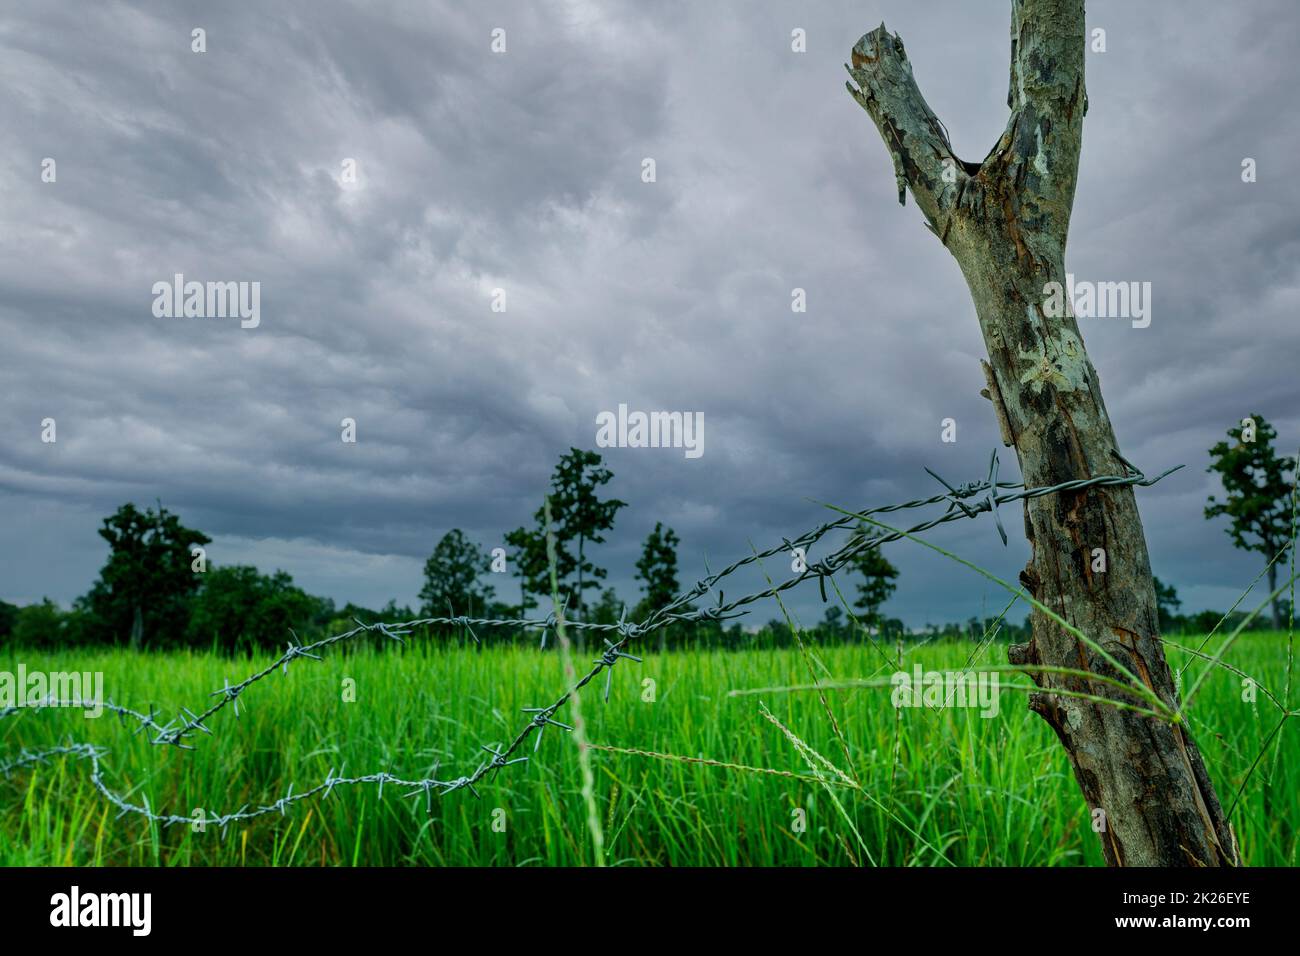 Green rice paddy field with a barbed wire fence and wooden pole with a stormy sky. Rice farm in Asia. Green paddy field. Landscape of agricultural farm. Agricultural area. Rice farm in rainy season. Stock Photo